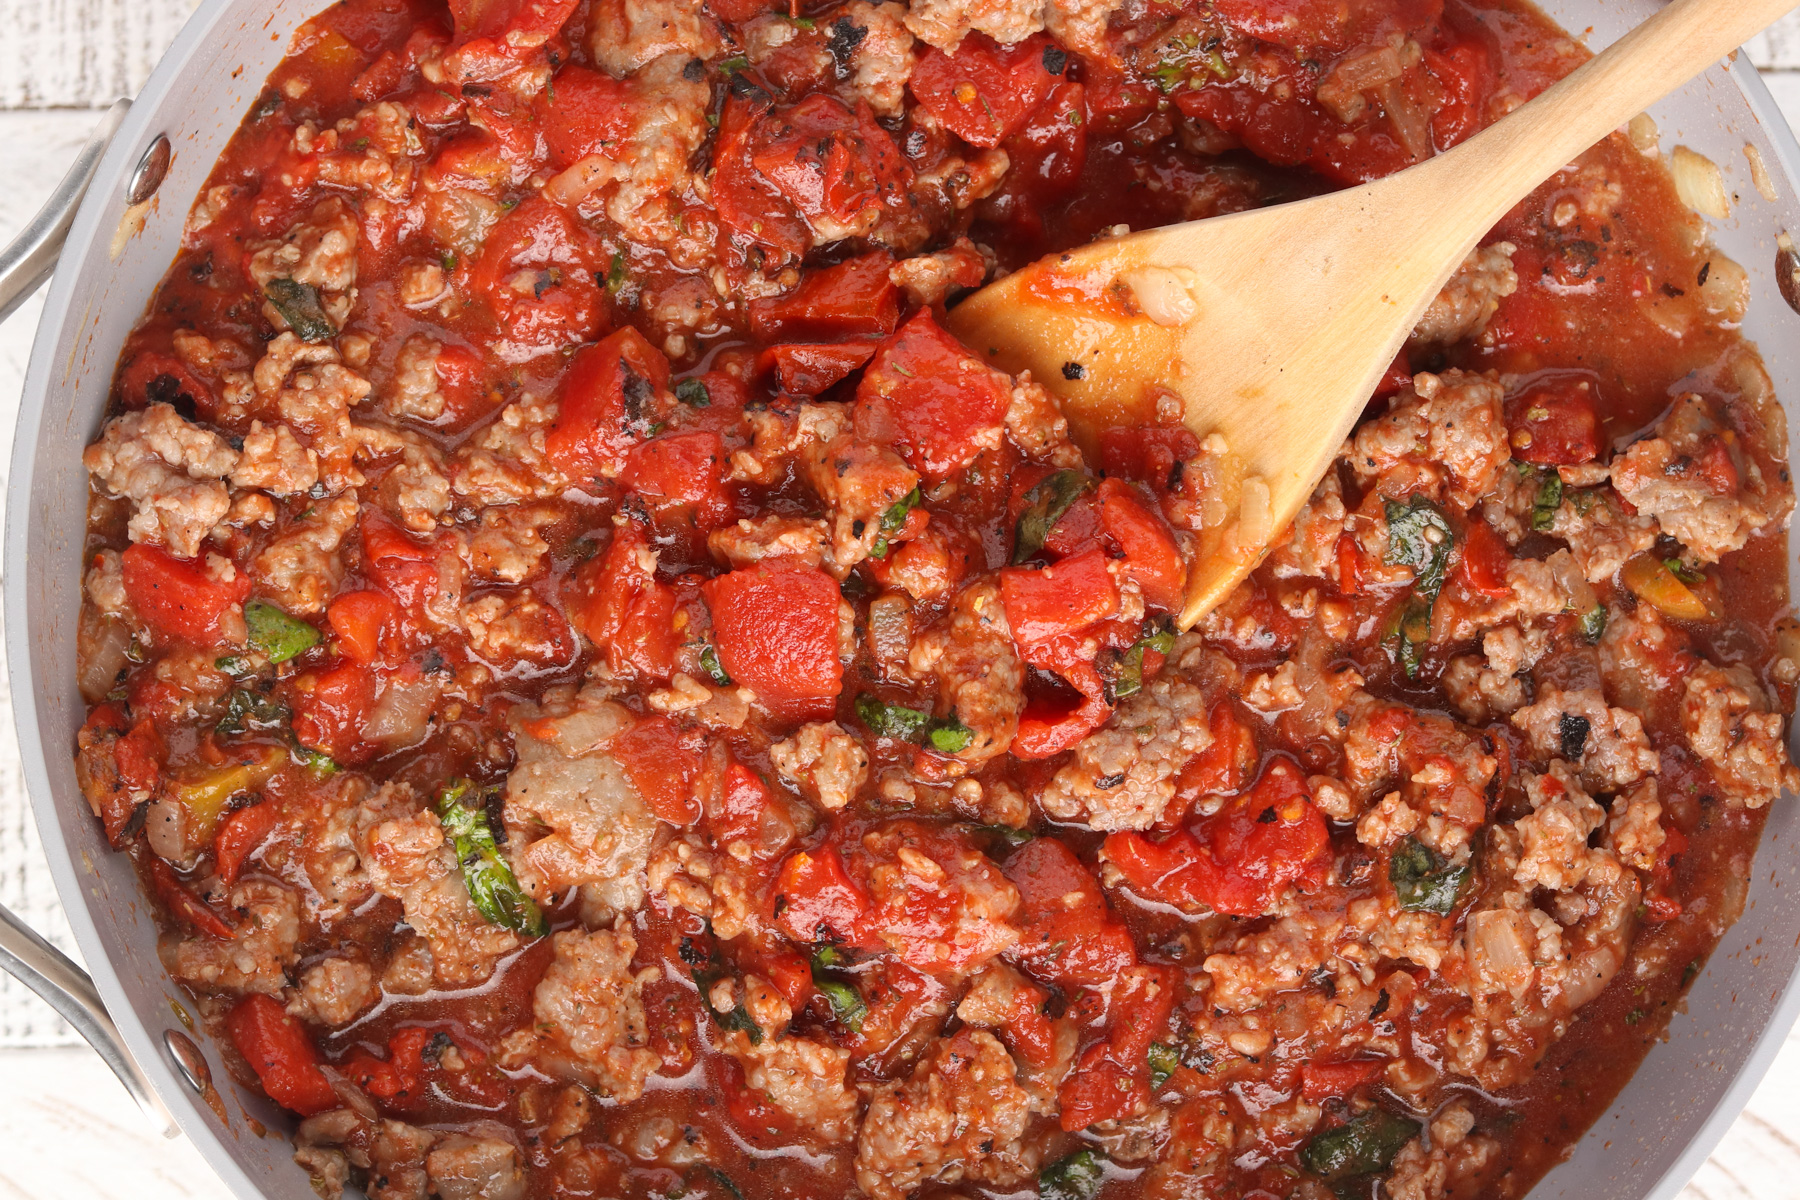 Step 4 - Allow meat sauce to simmer for 20 minutes on stove.